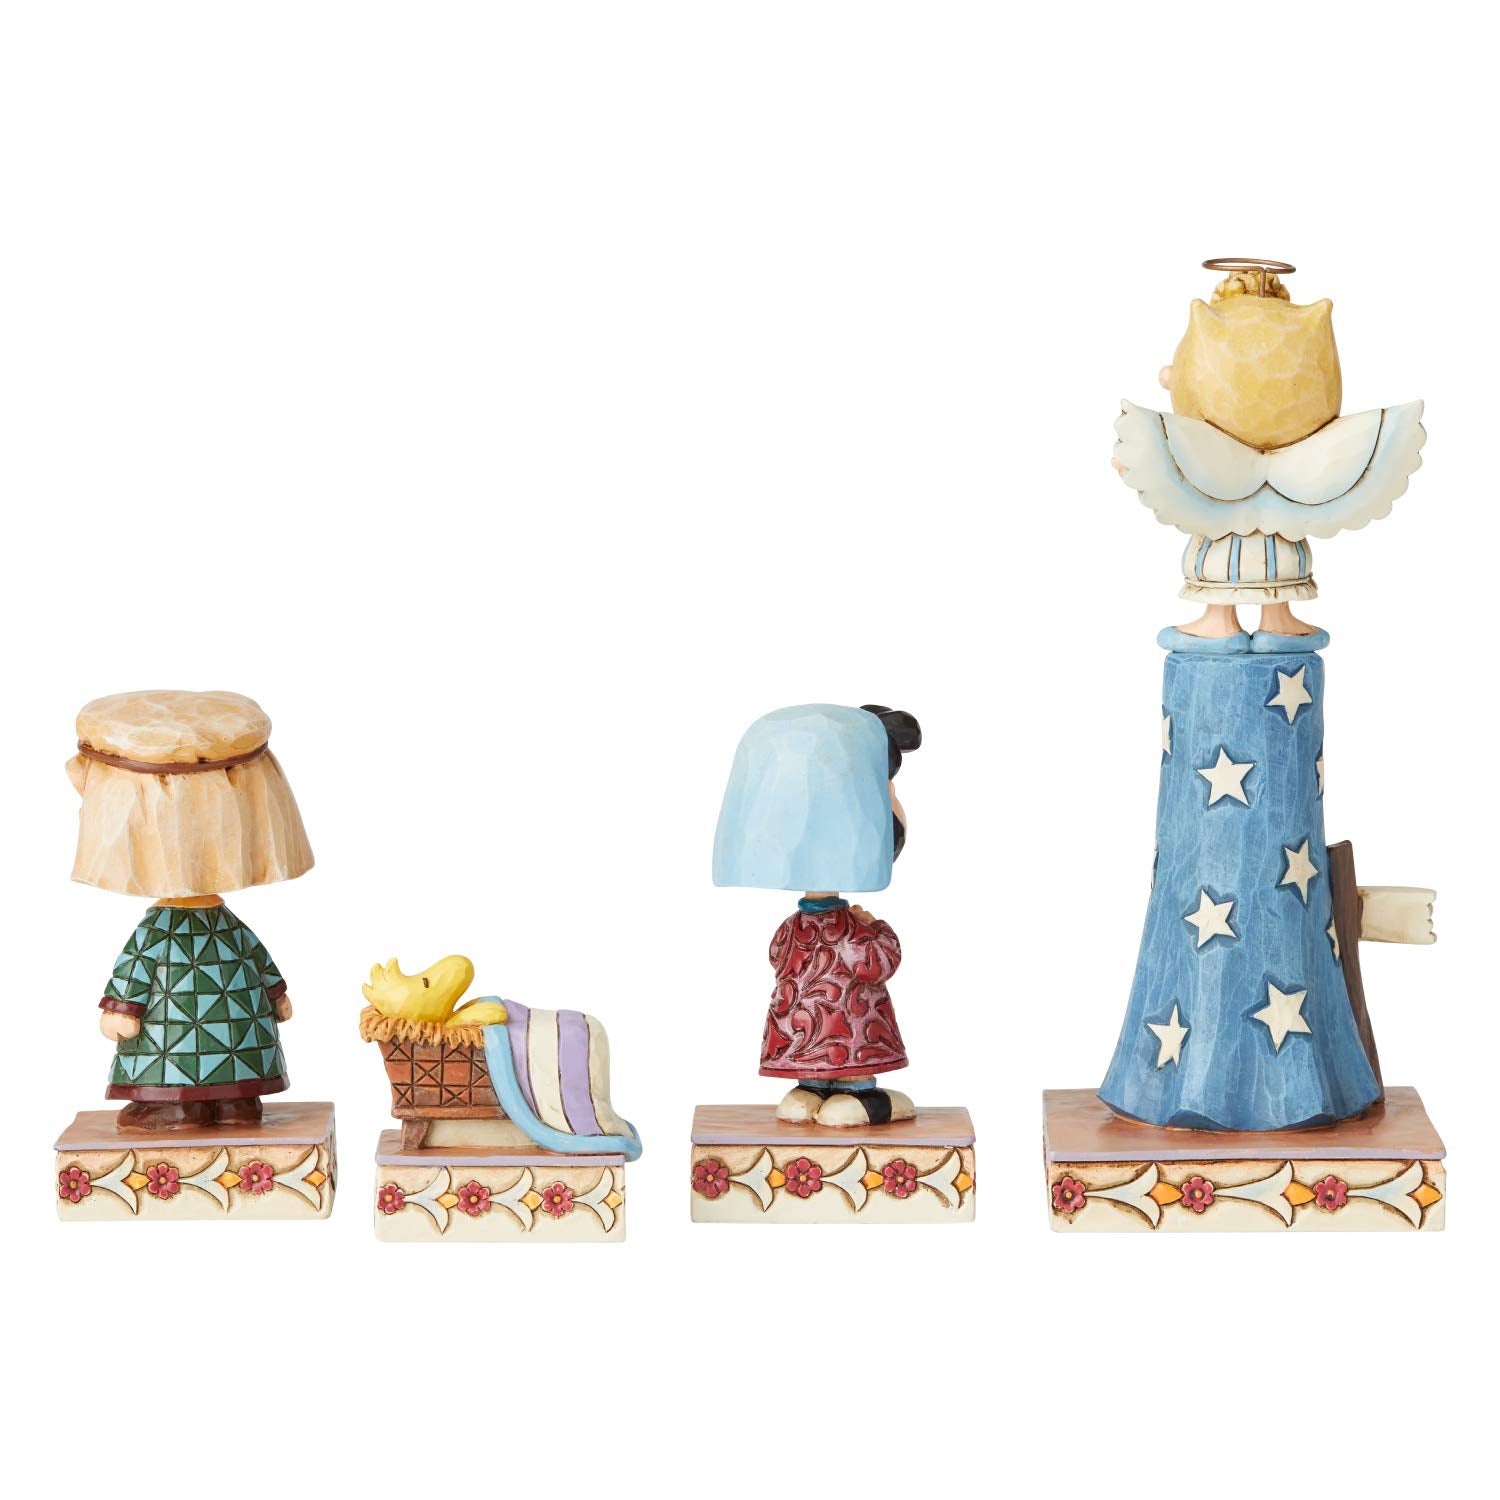 Enesco Peanuts by Jim Shore Christmas Pageant True Meaning Figurine Set, 7.5 Inch, Multicolor